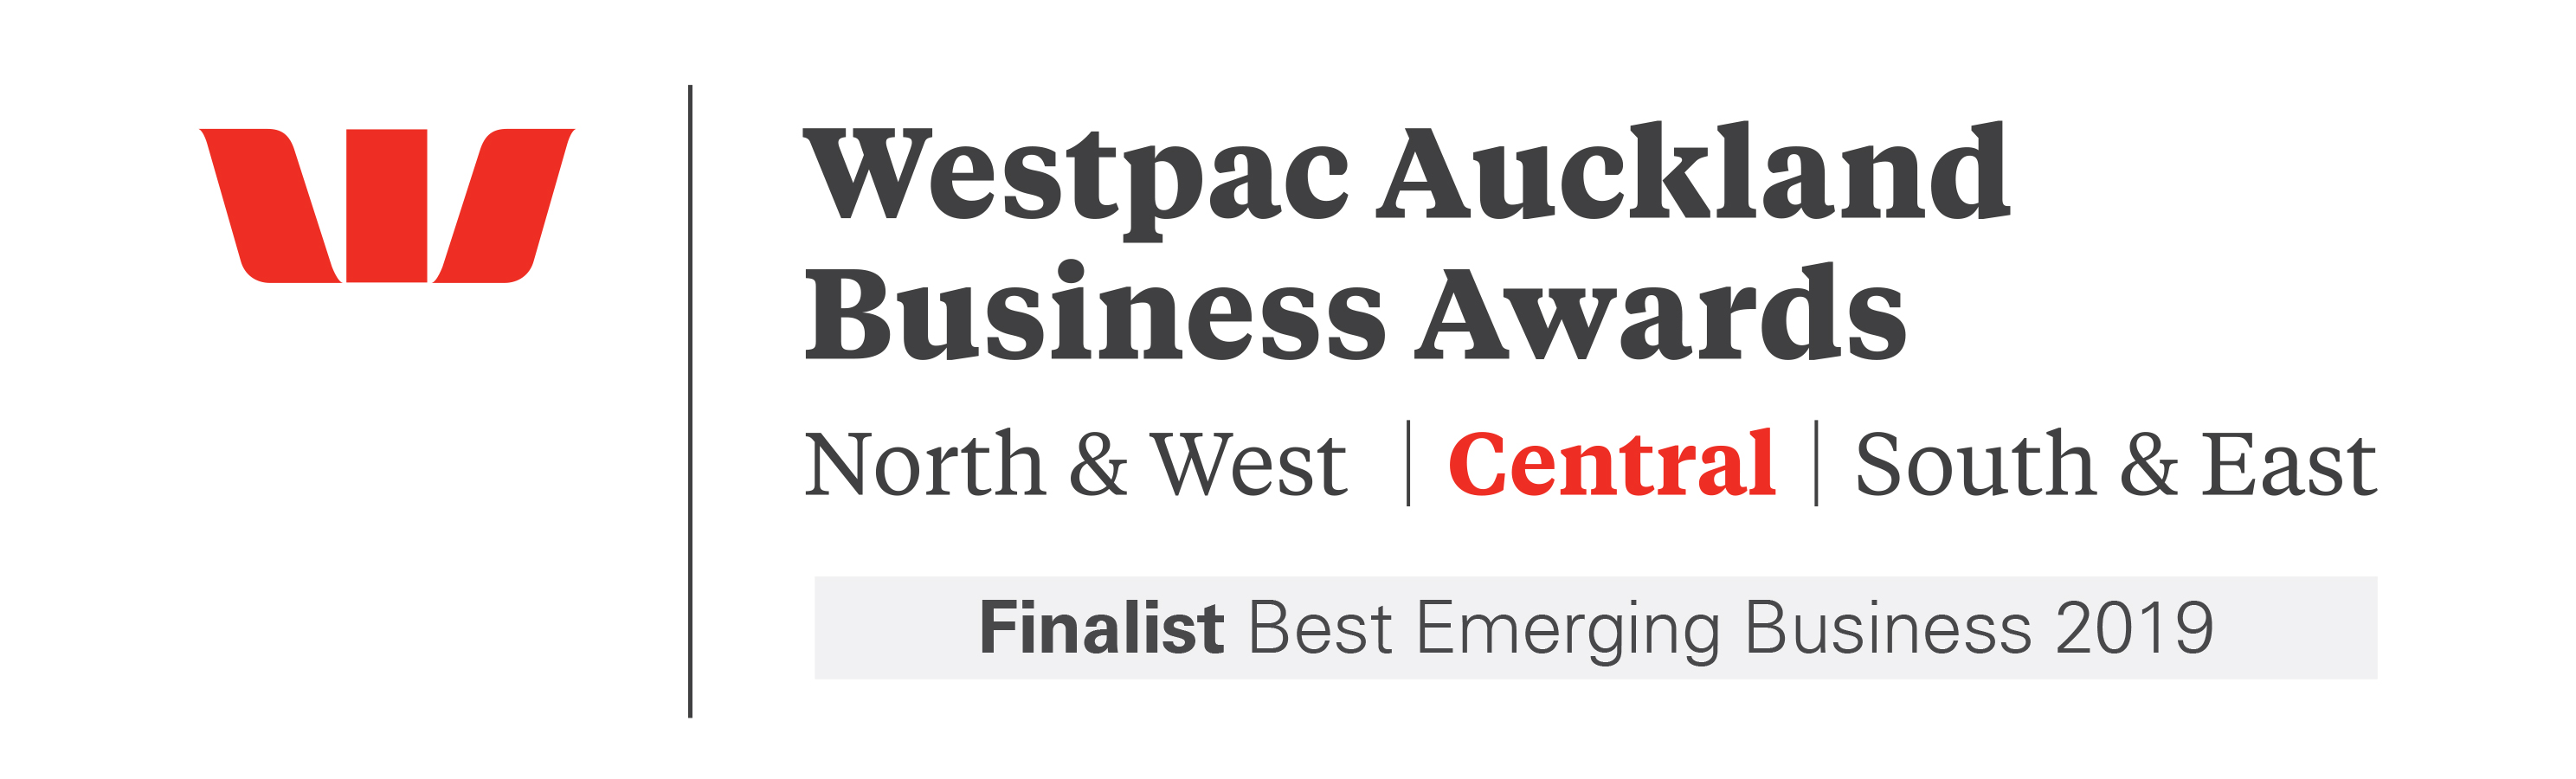 JOYN is a finalist in Westpac Auckland Business Awards Best Emerging Business Category for 2019